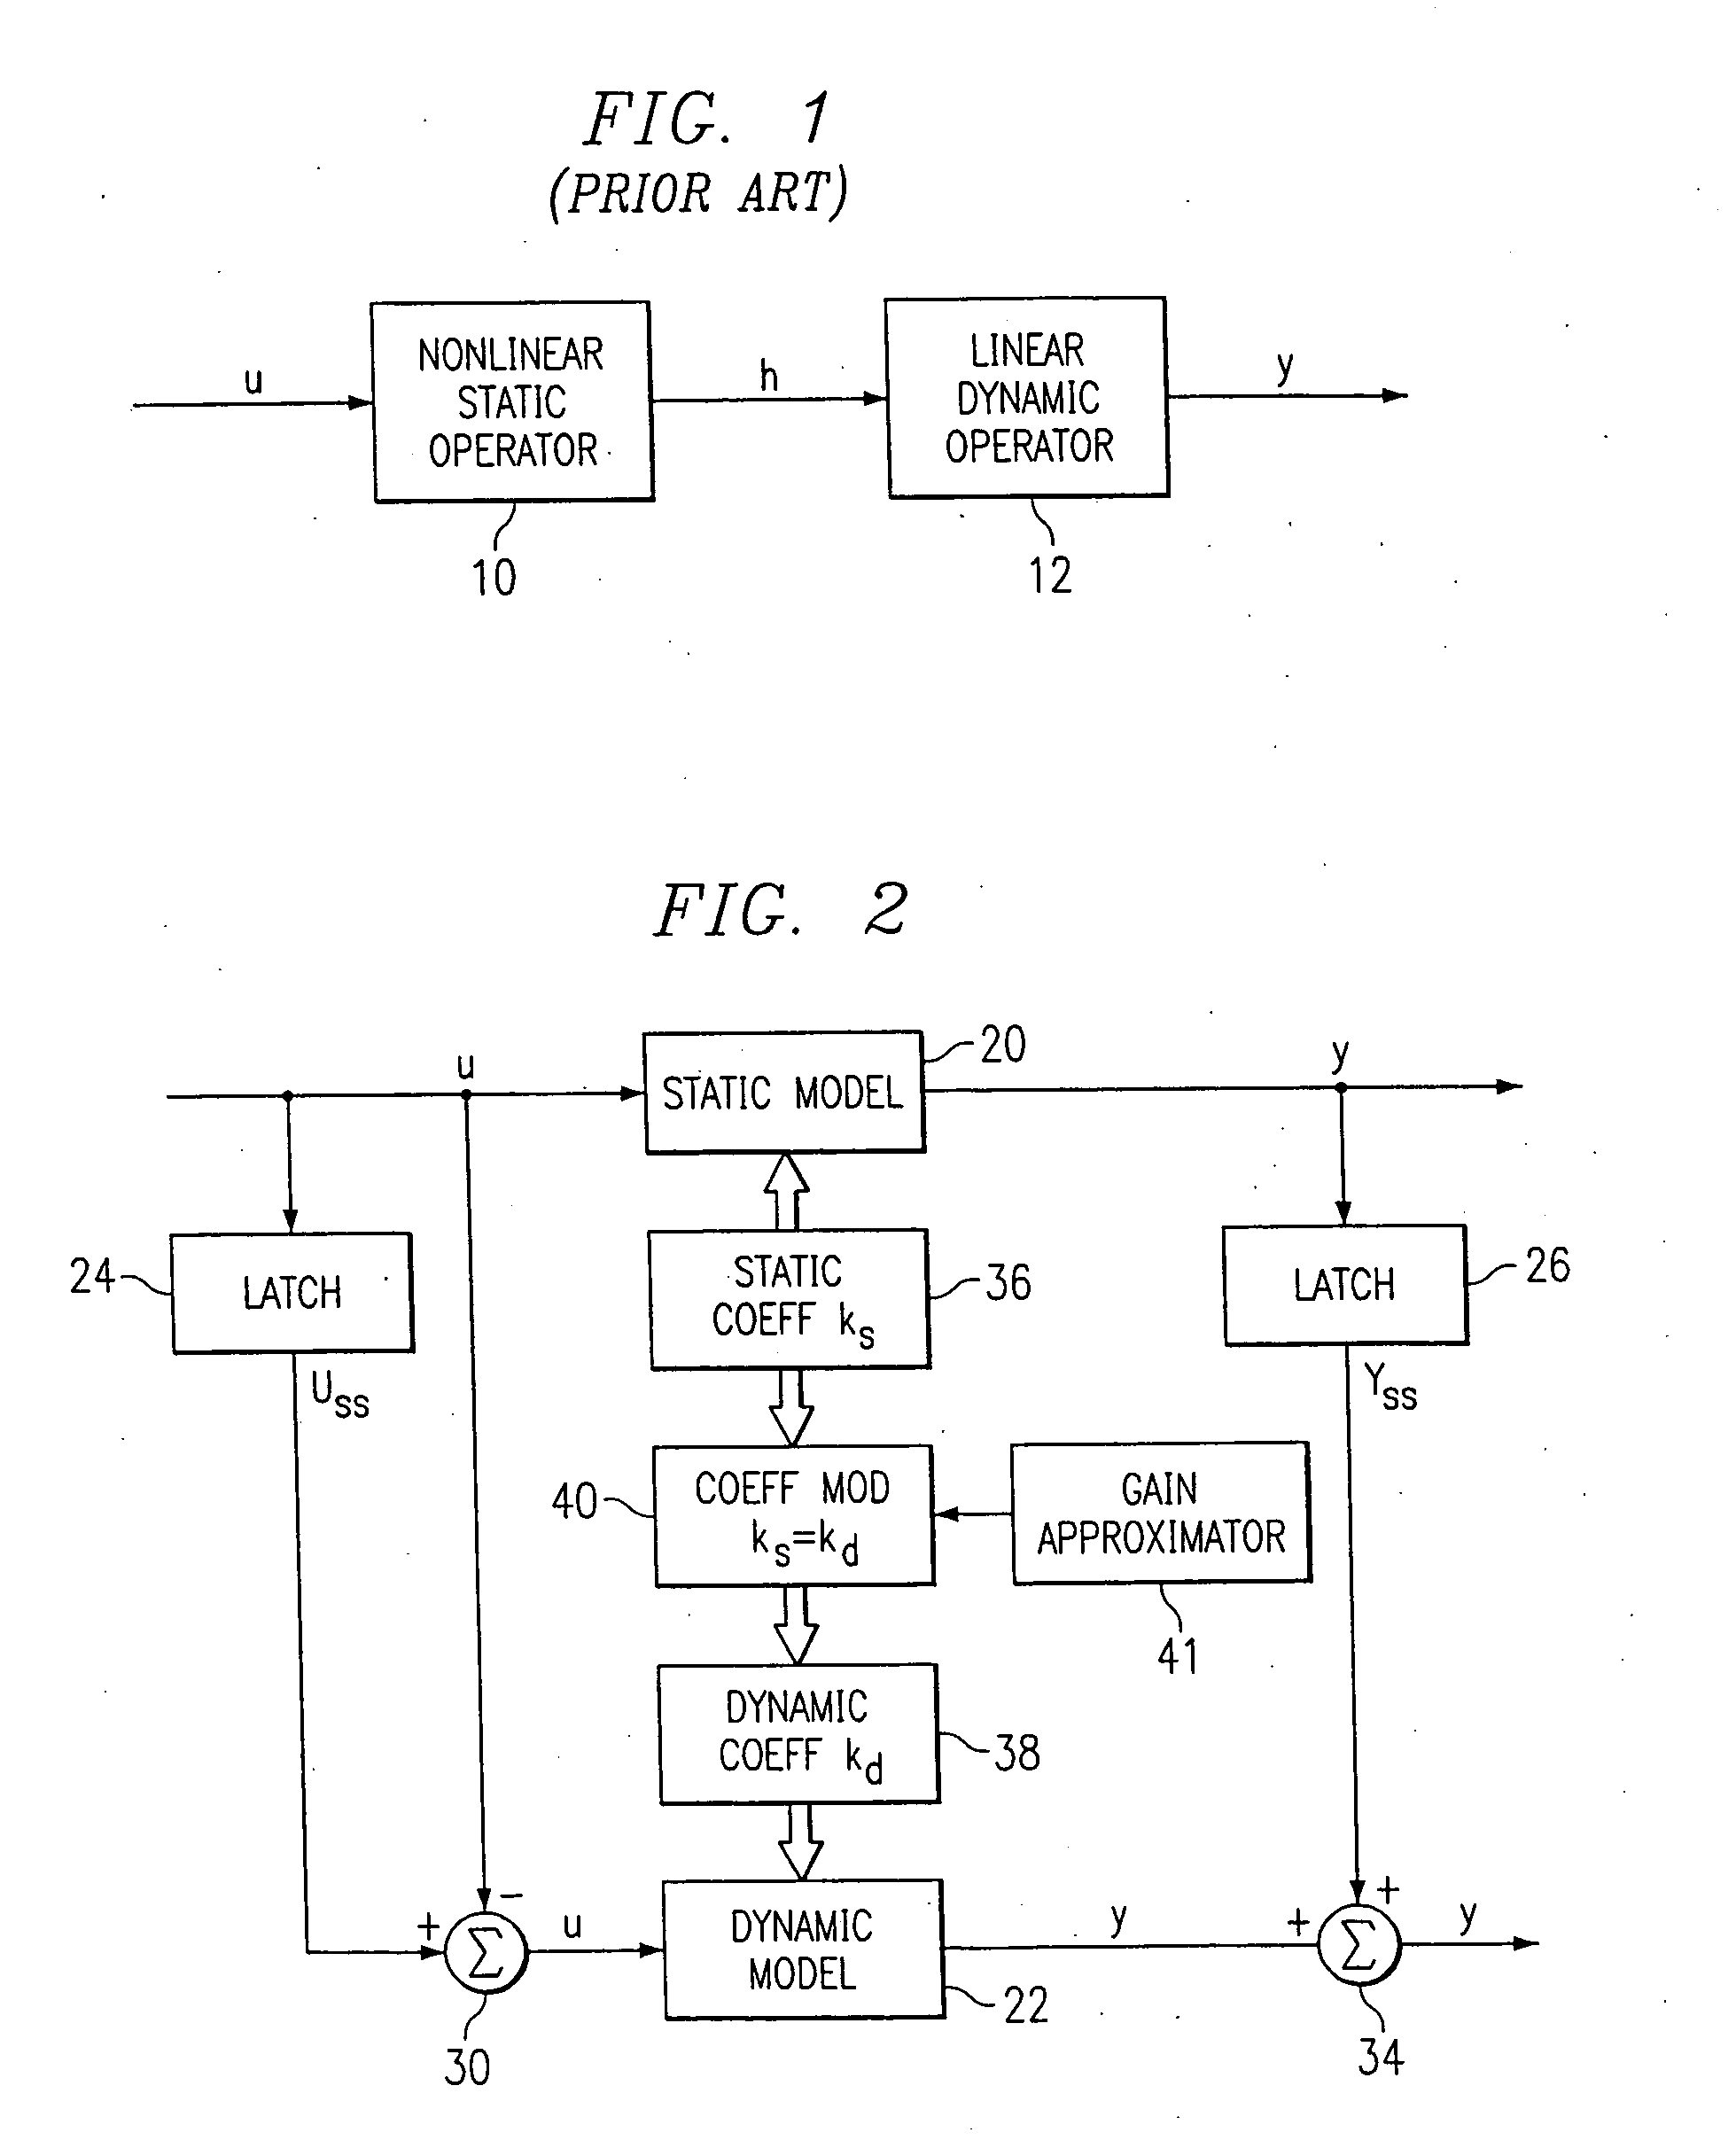 Method and apparatus for attenuating error in dynamic and steady-state processes for prediction, control, and optimization